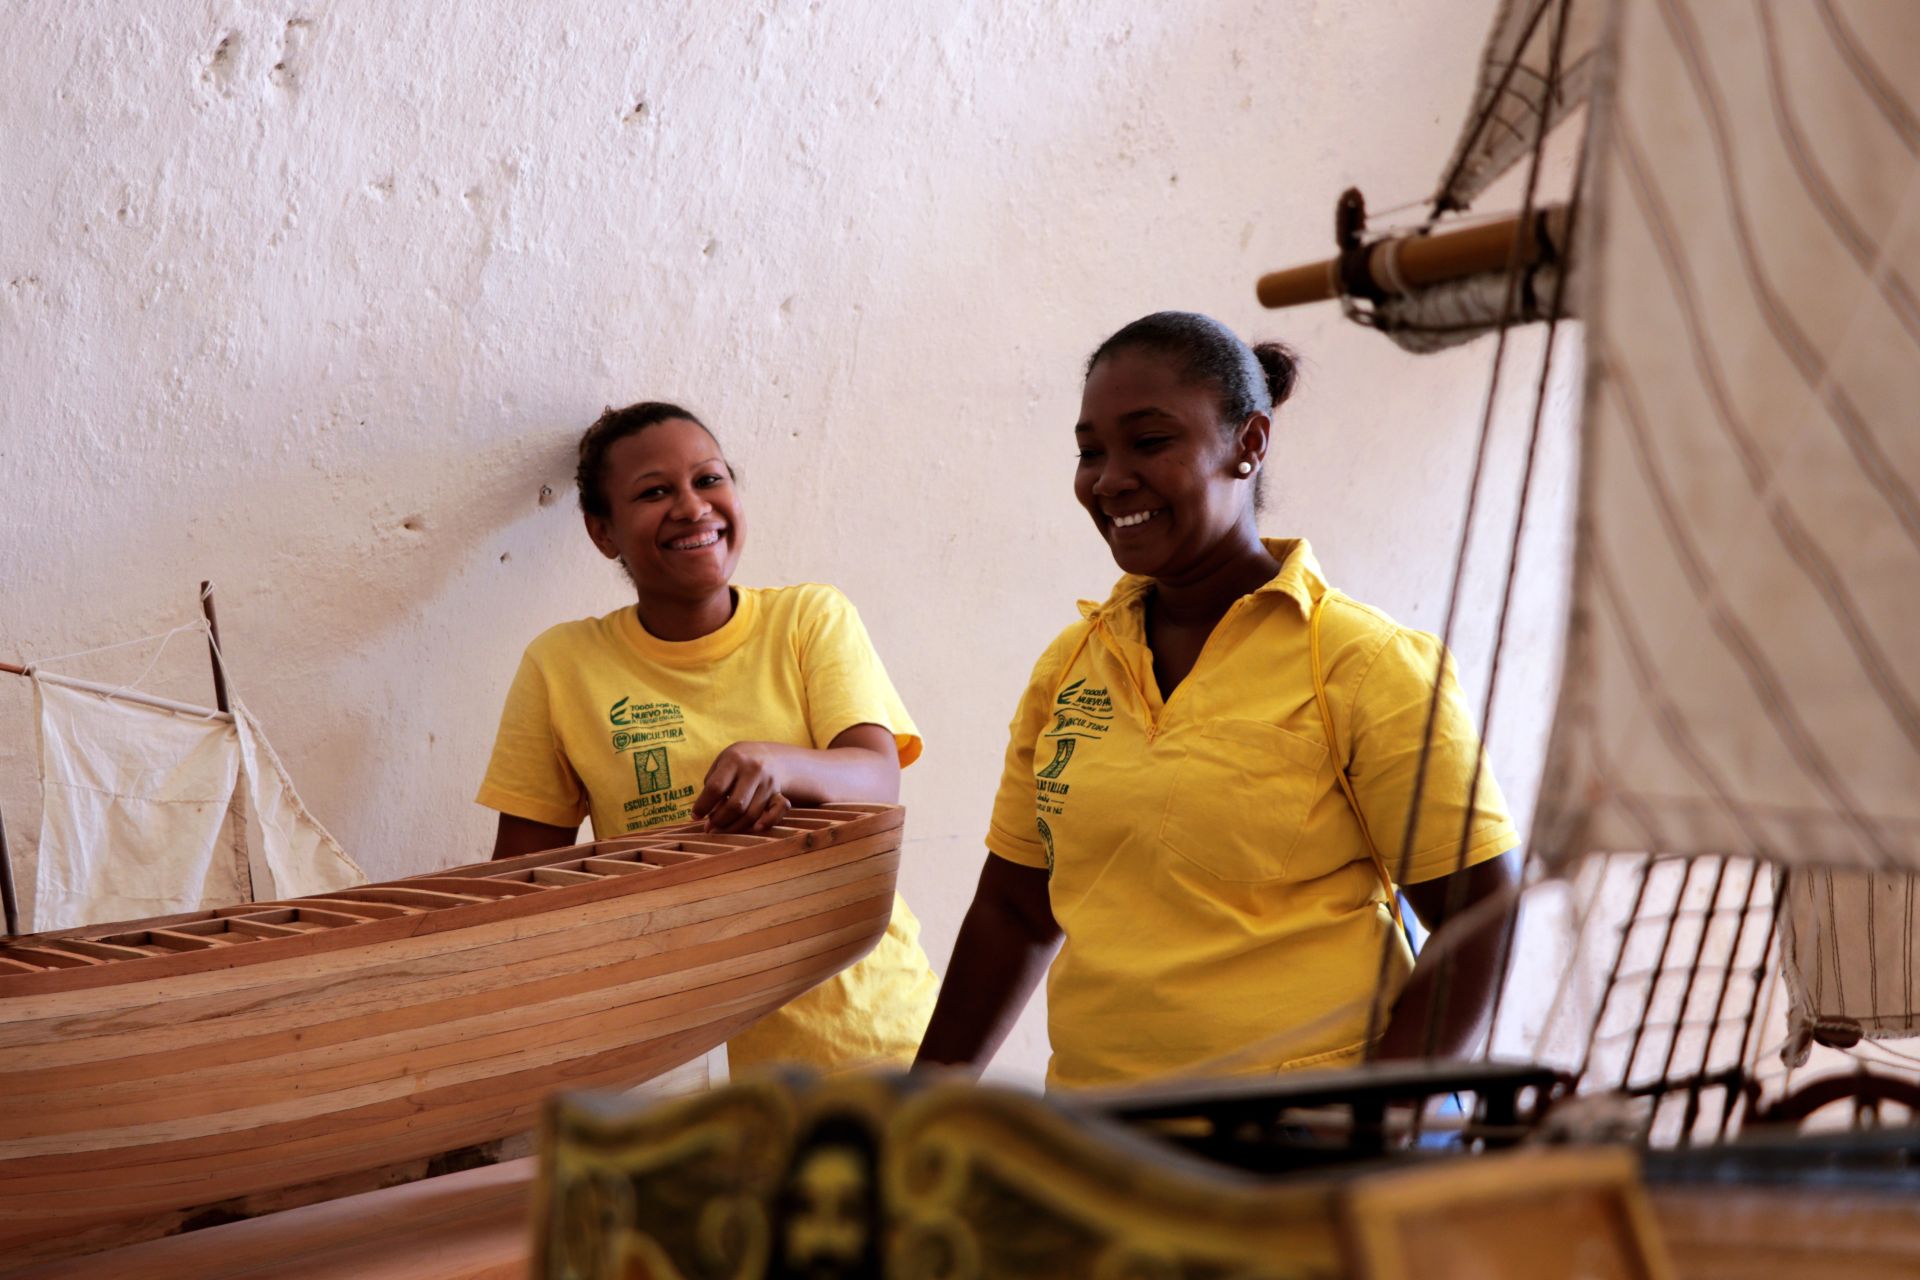 In the traditional crafts programme, gender equality id promoted, by including women in areas considered exclusive for men, as in the case of woodwork and traditional building techniques